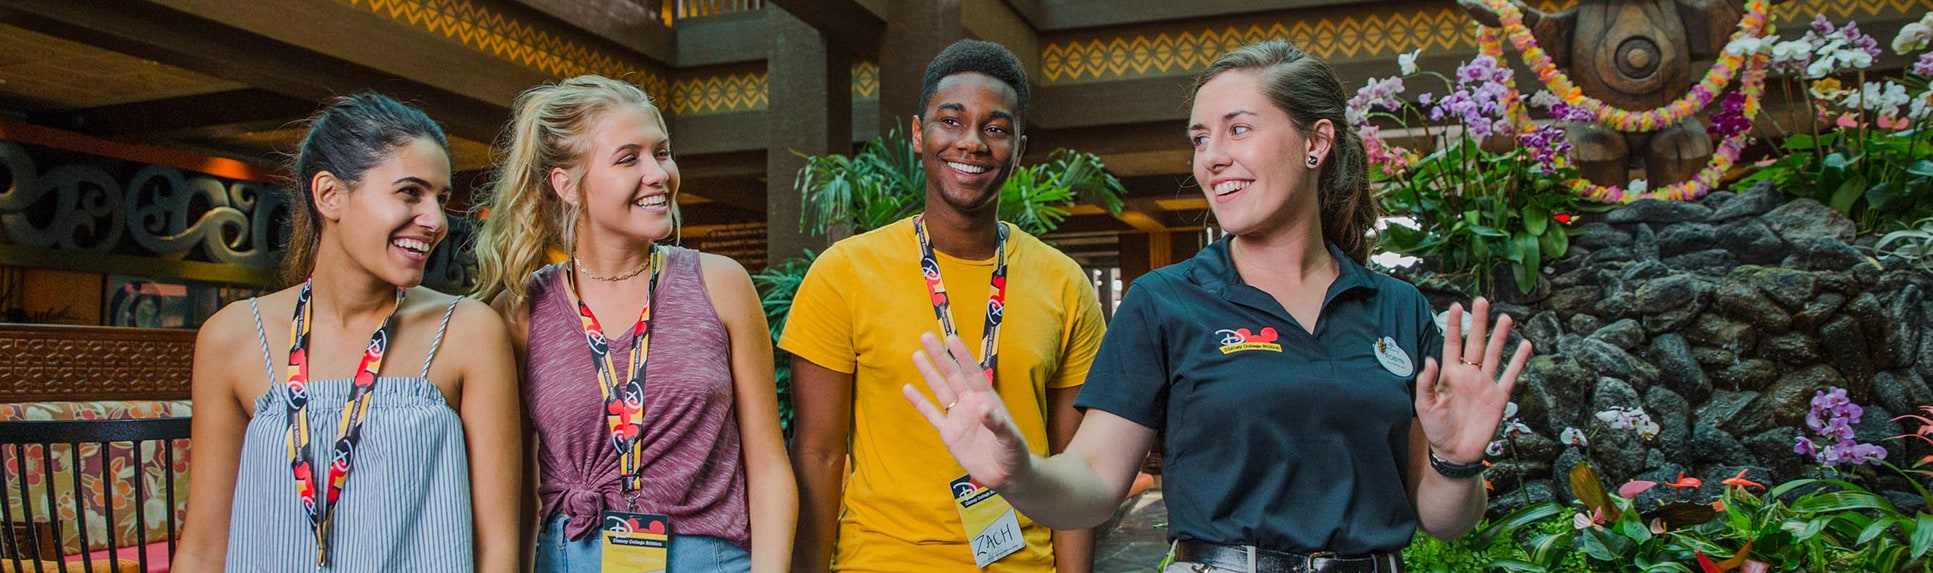 A female Disney staffer talks with 2 female students and 1 male student in a Disney Resort hotel
